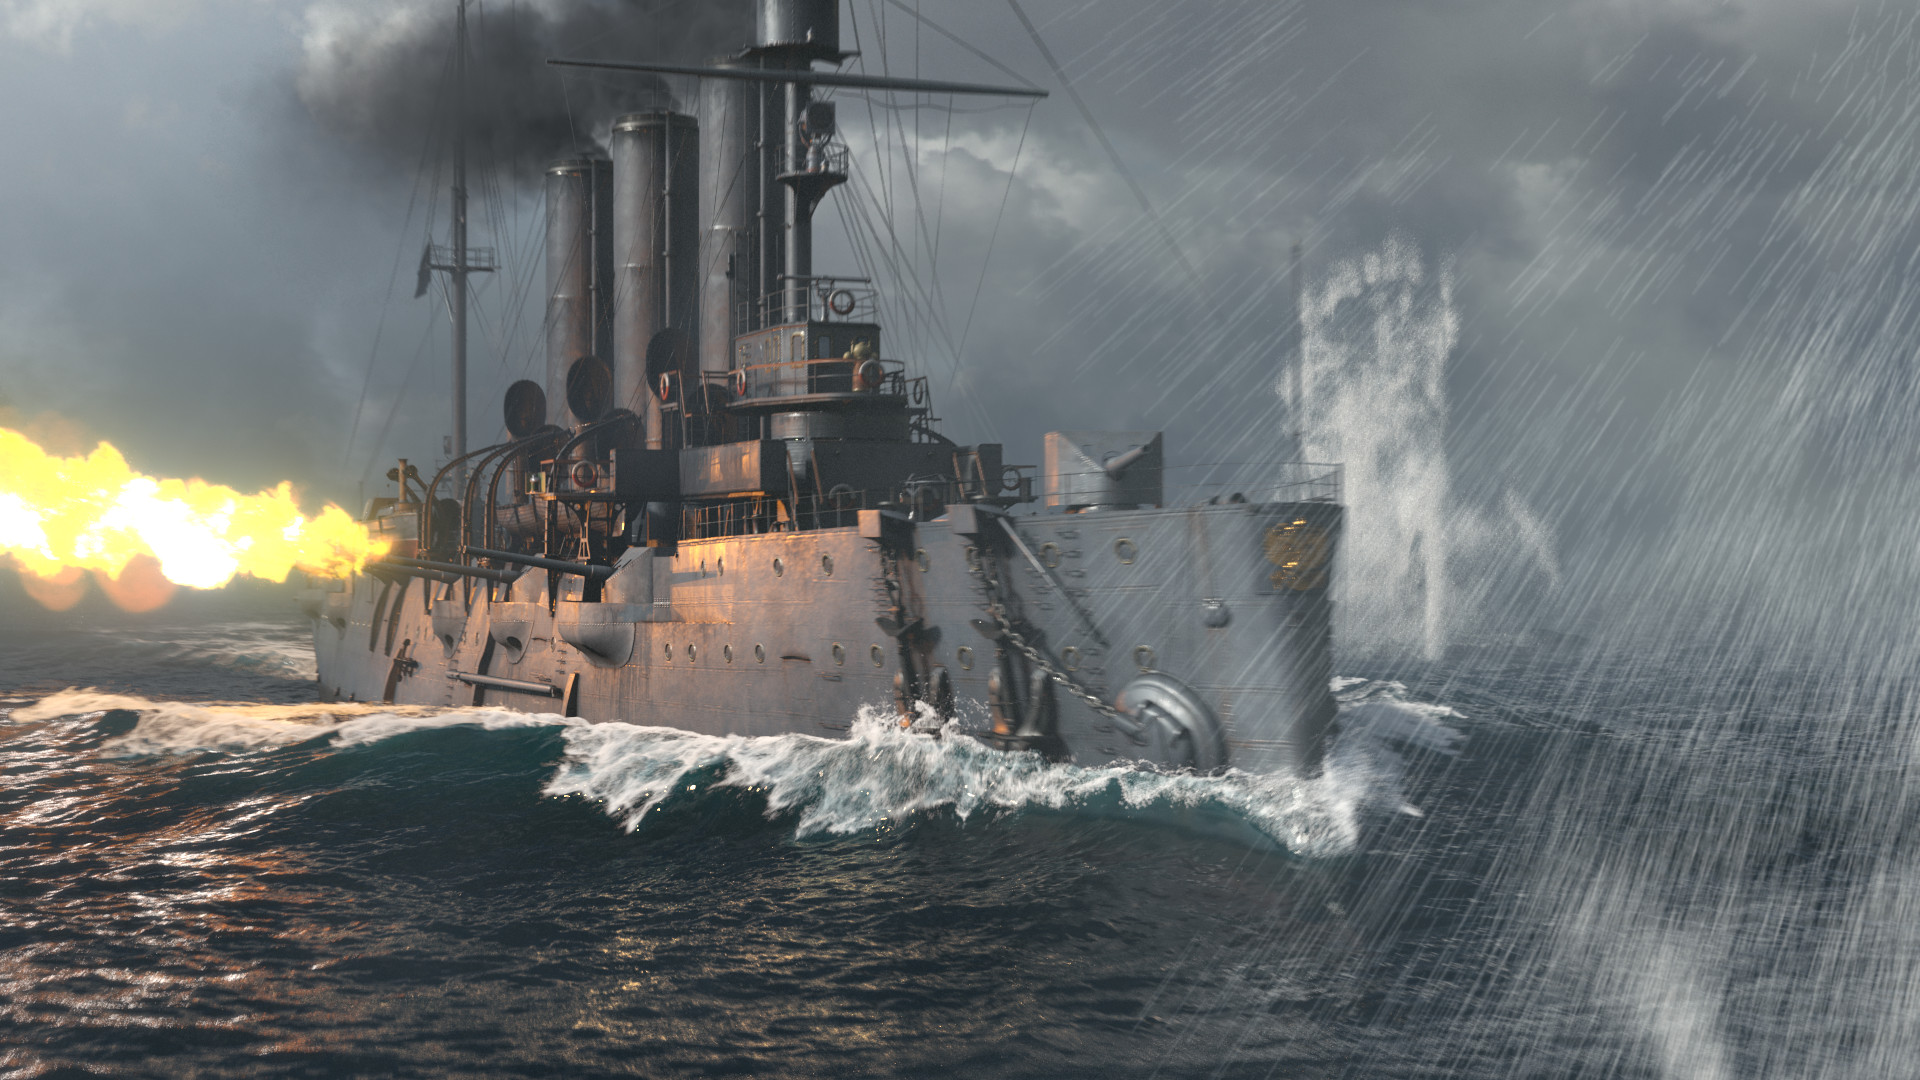 world of warships legends campaign